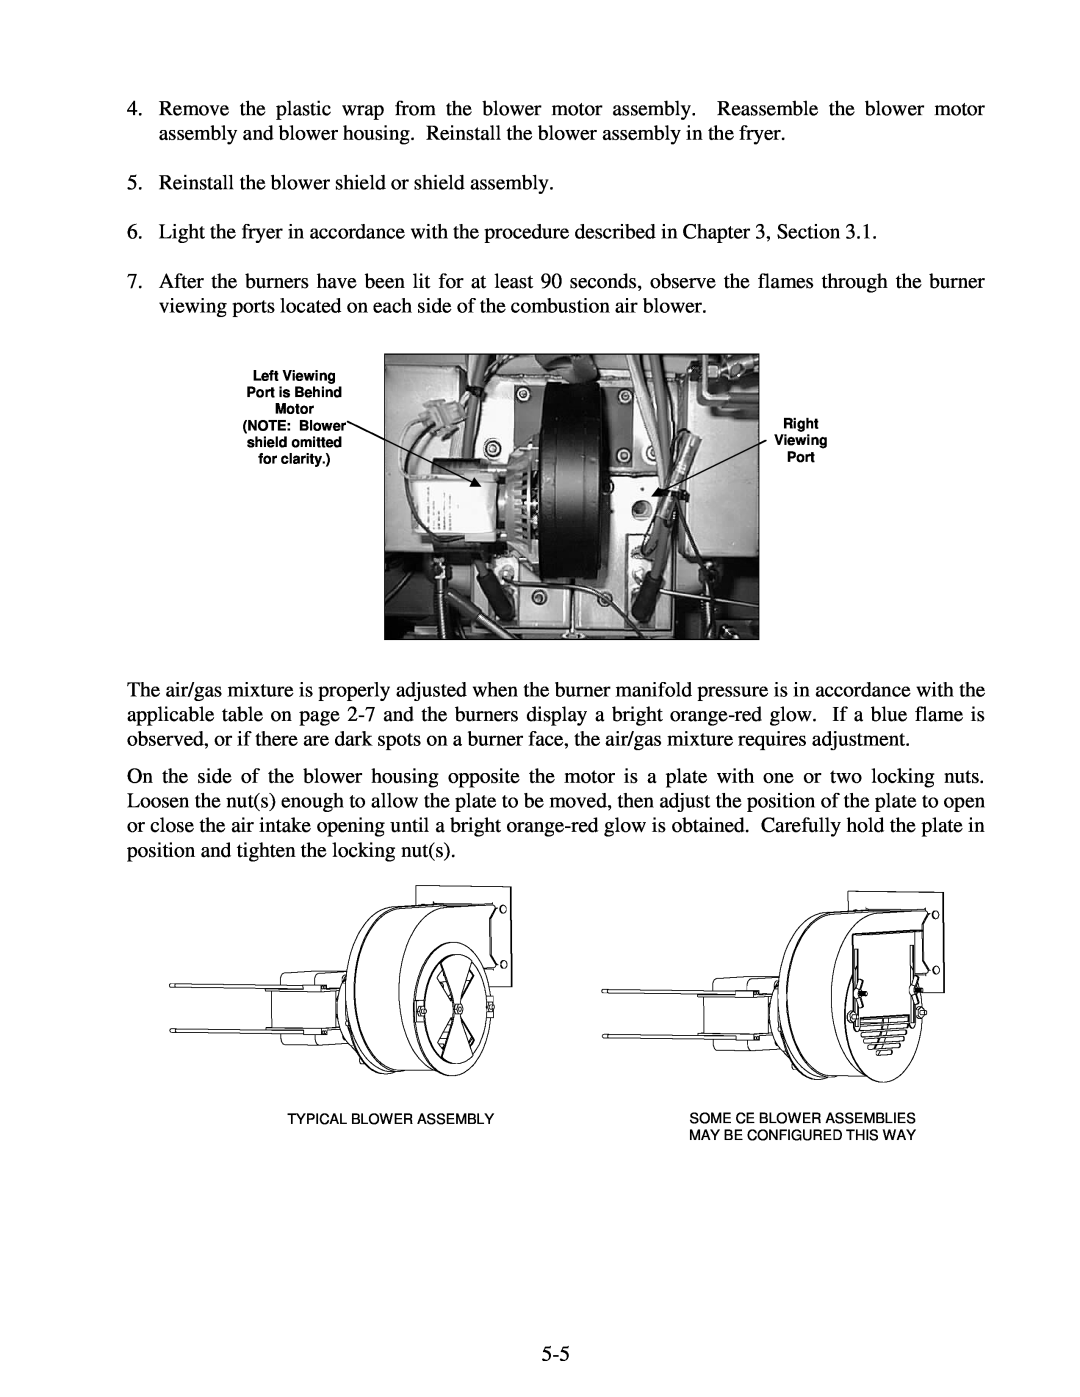 Frymaster H55 operation manual Reinstall the blower shield or shield assembly 